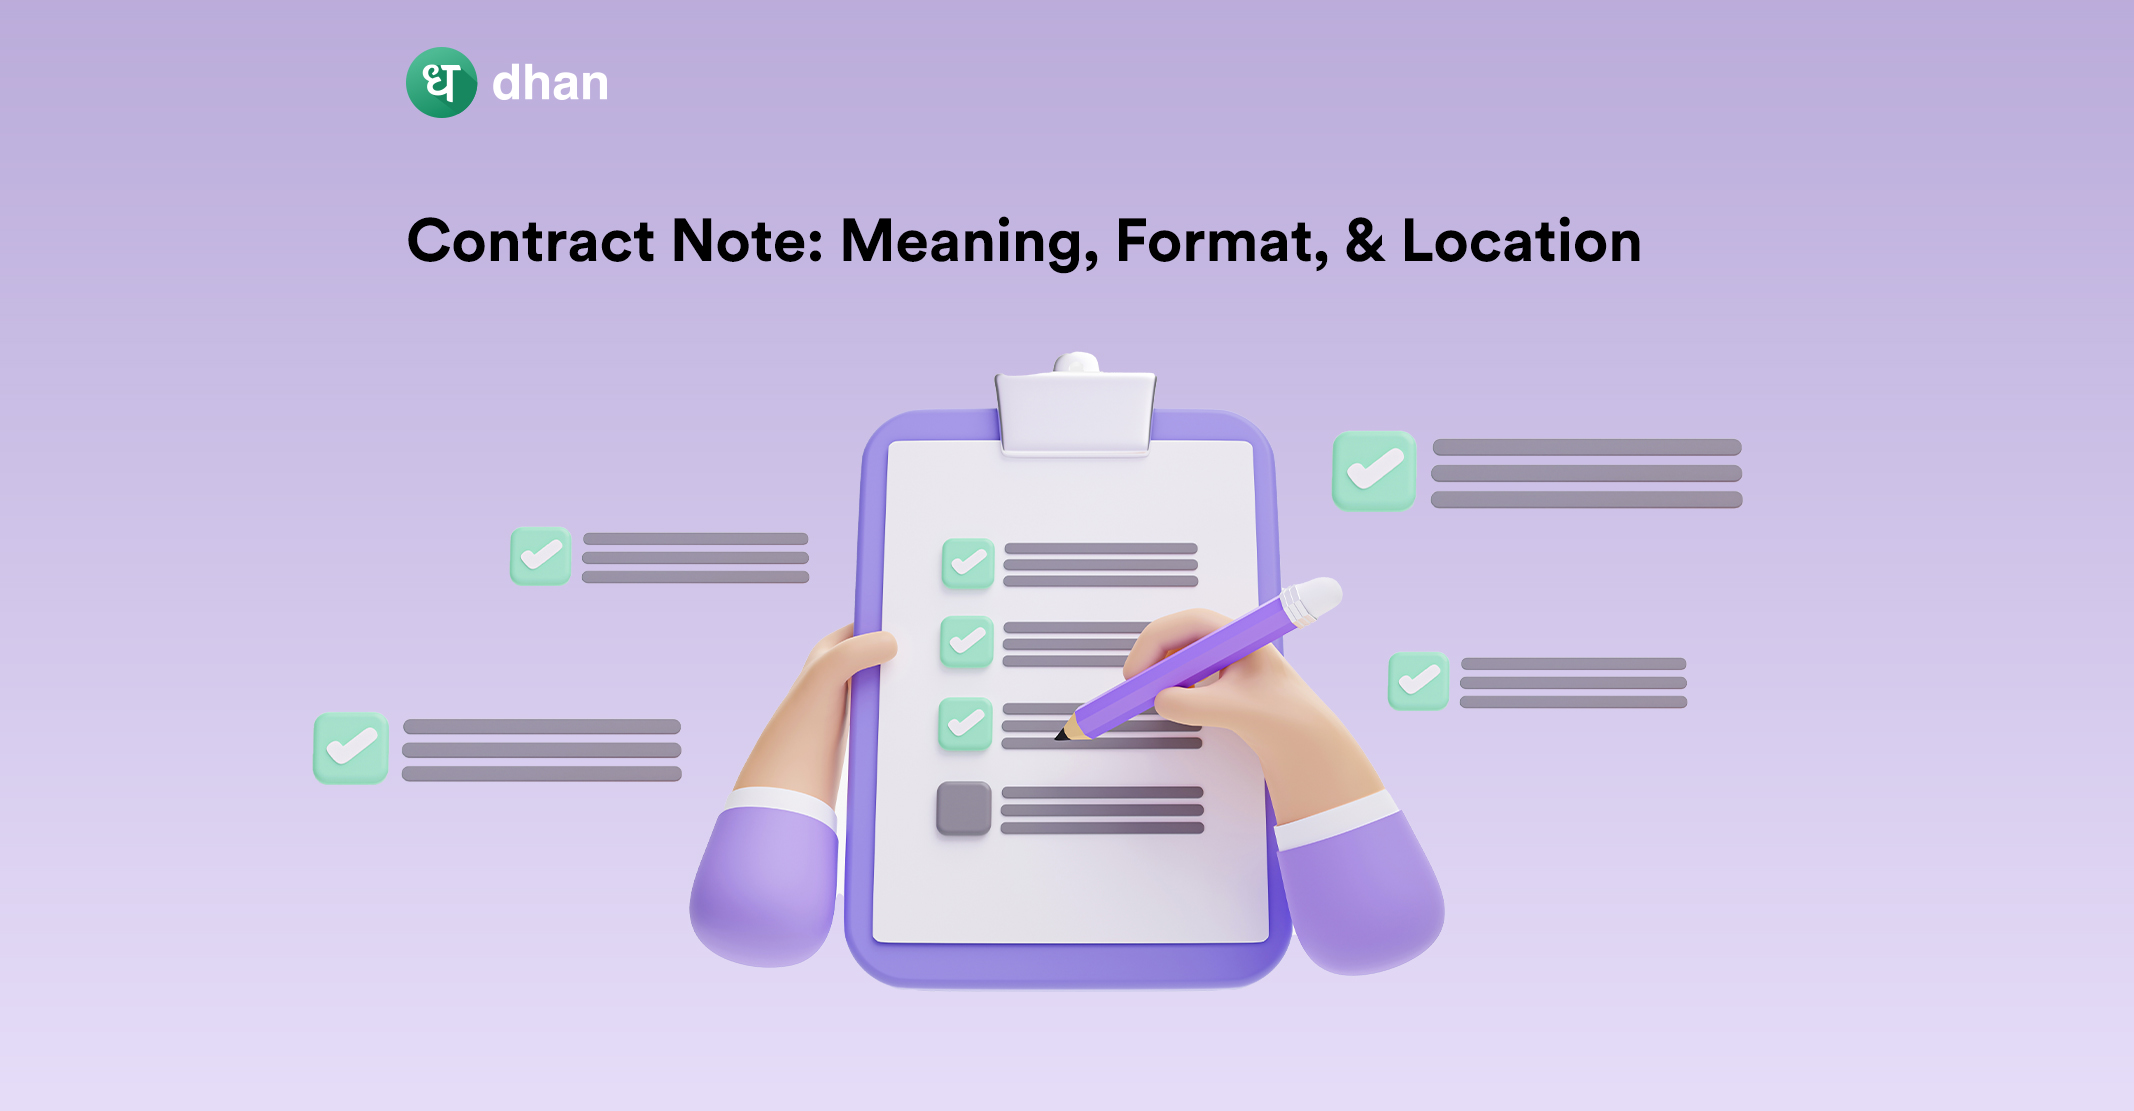 Contract Note